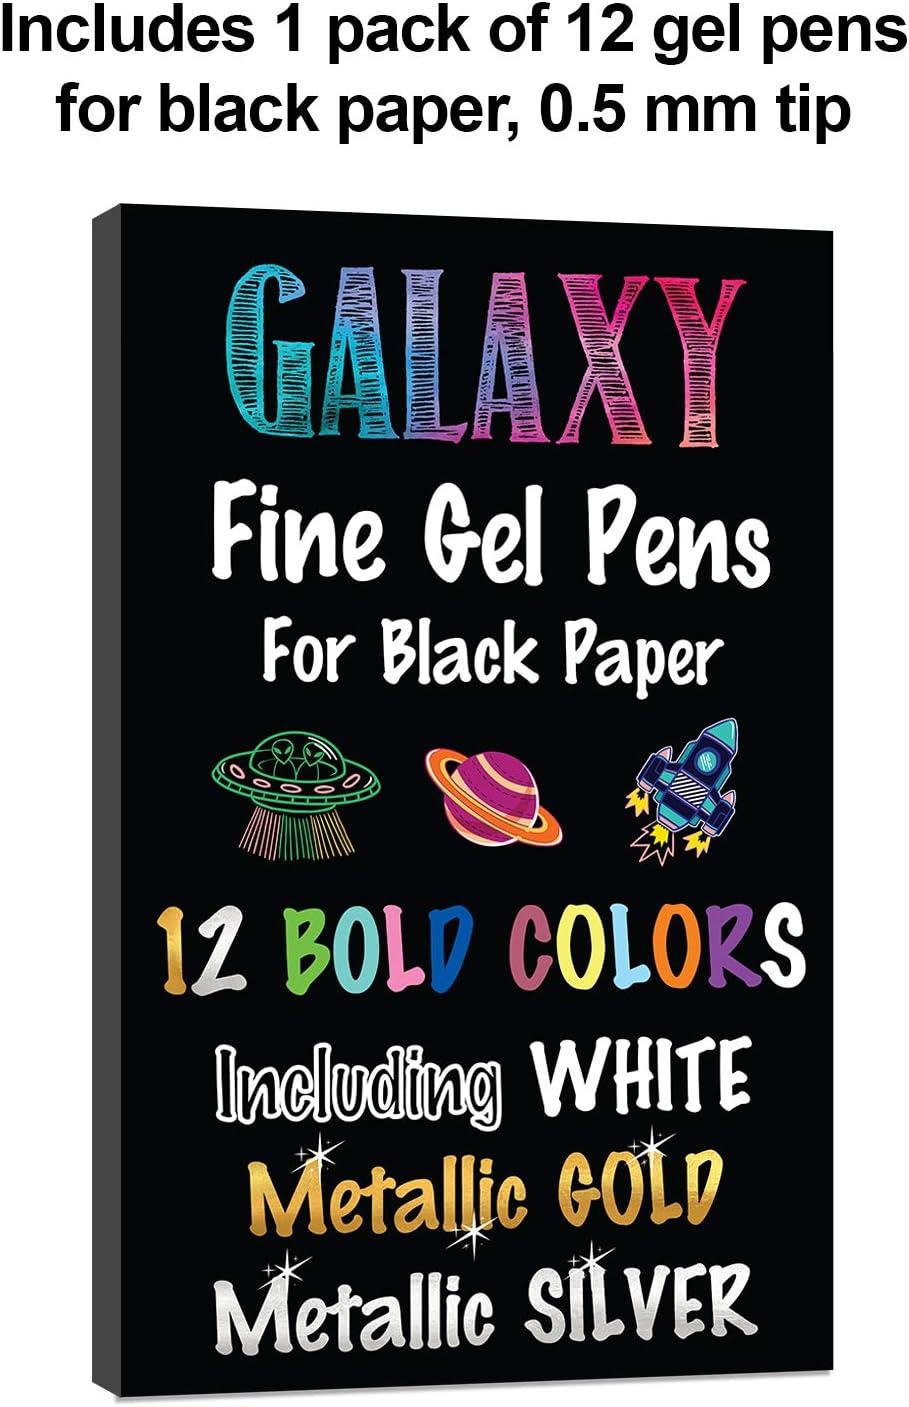 Cute Office Supplies, Black Sticky Notes and Gel Pens for Black Paper. 12  Gelly Roll Pens for Black Paper, Including White Gel Pen, Gold & Silver.  3x3